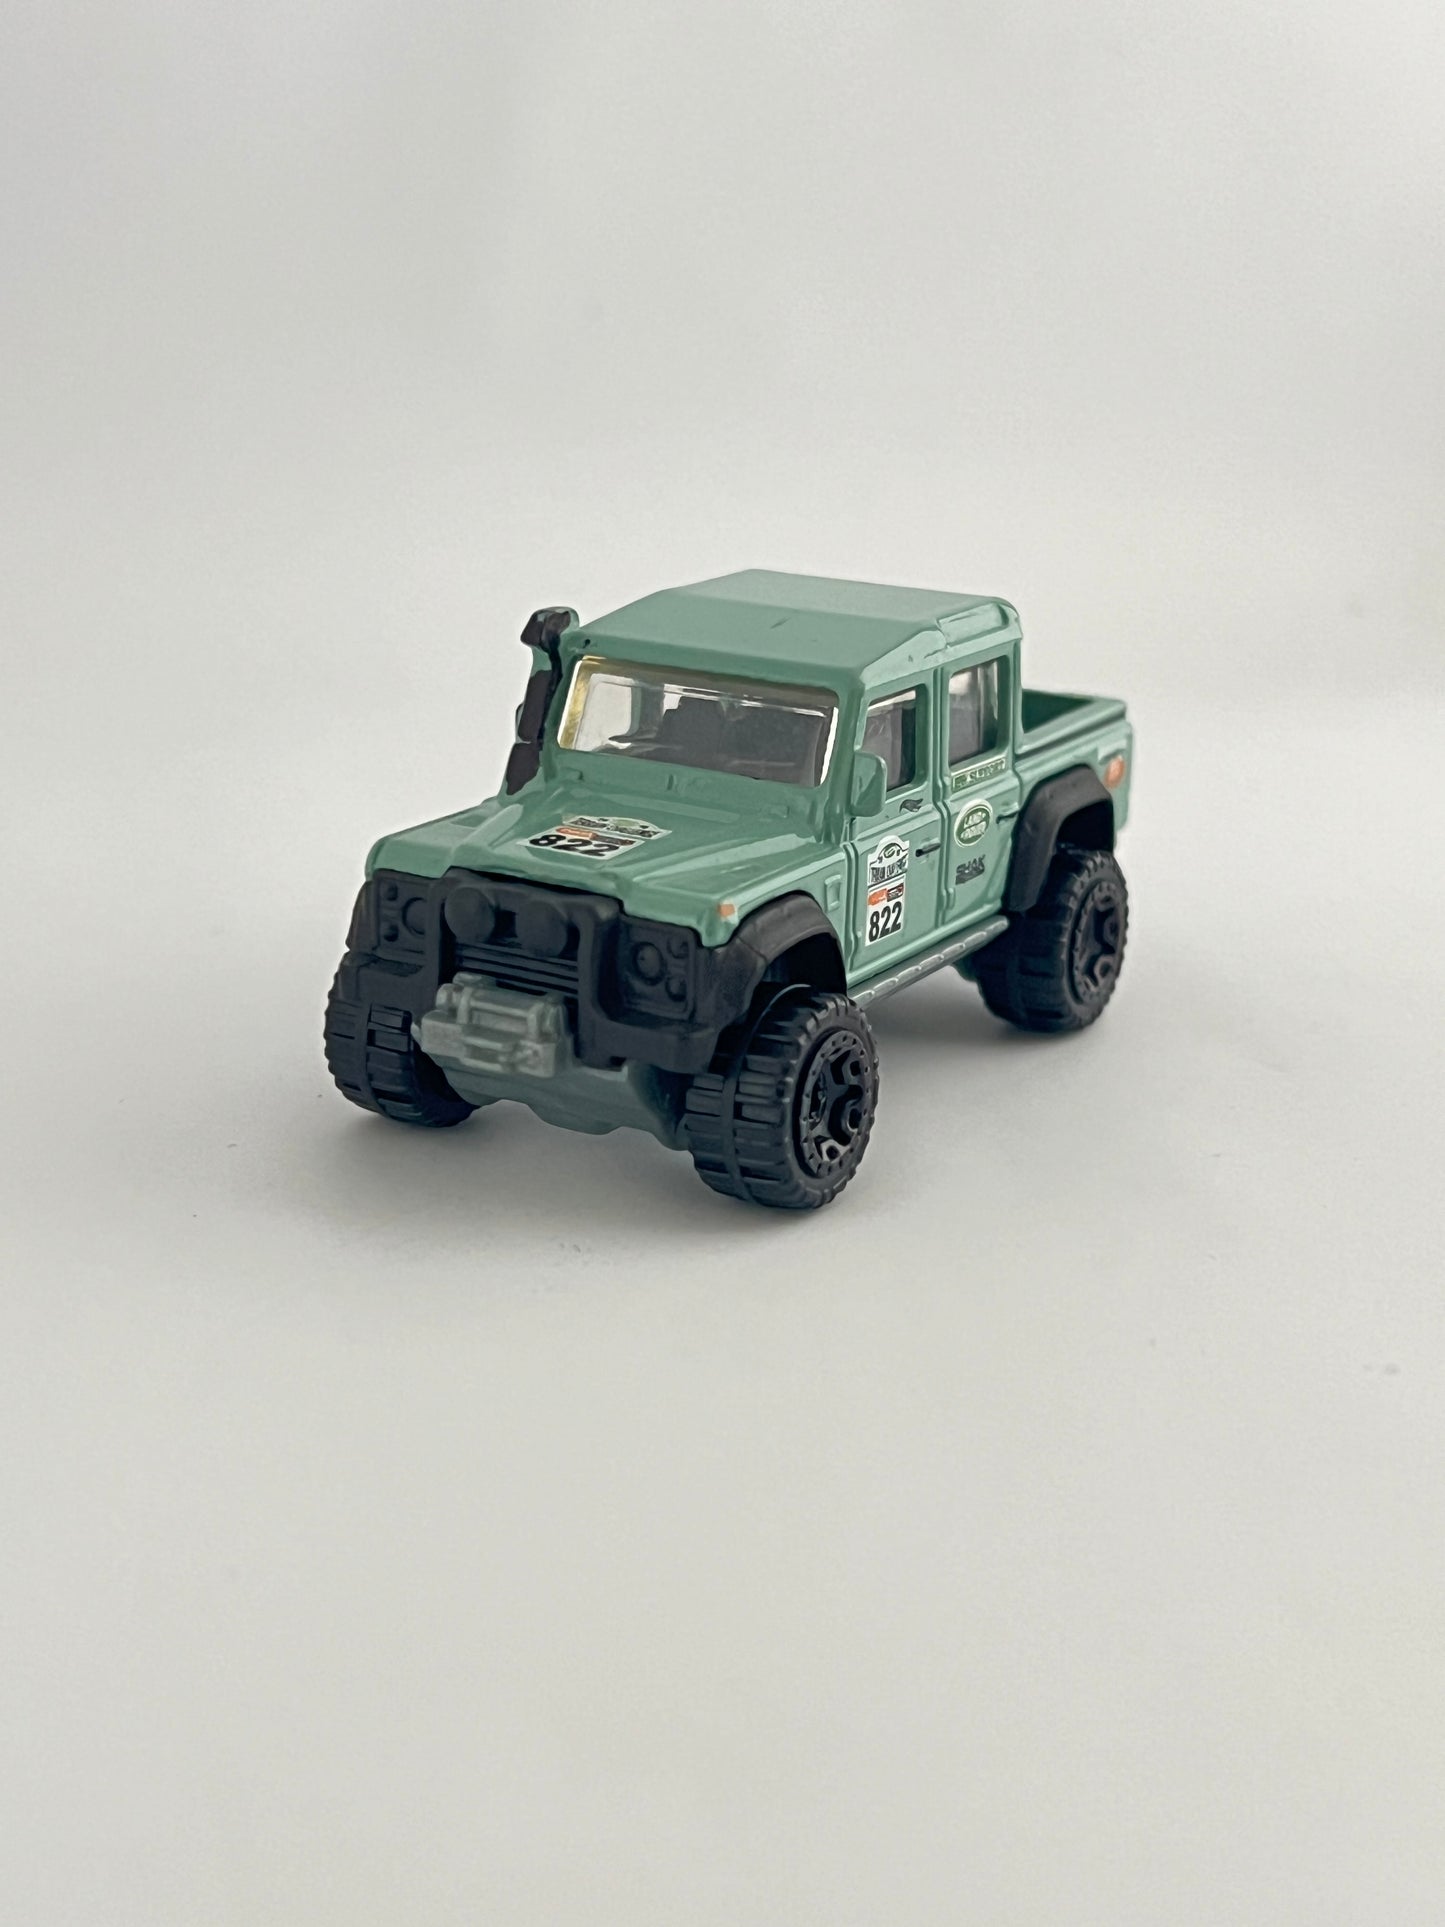 15 LAND ROVER DEFENDER DOUBLE CAB- UNCARDED - MINT